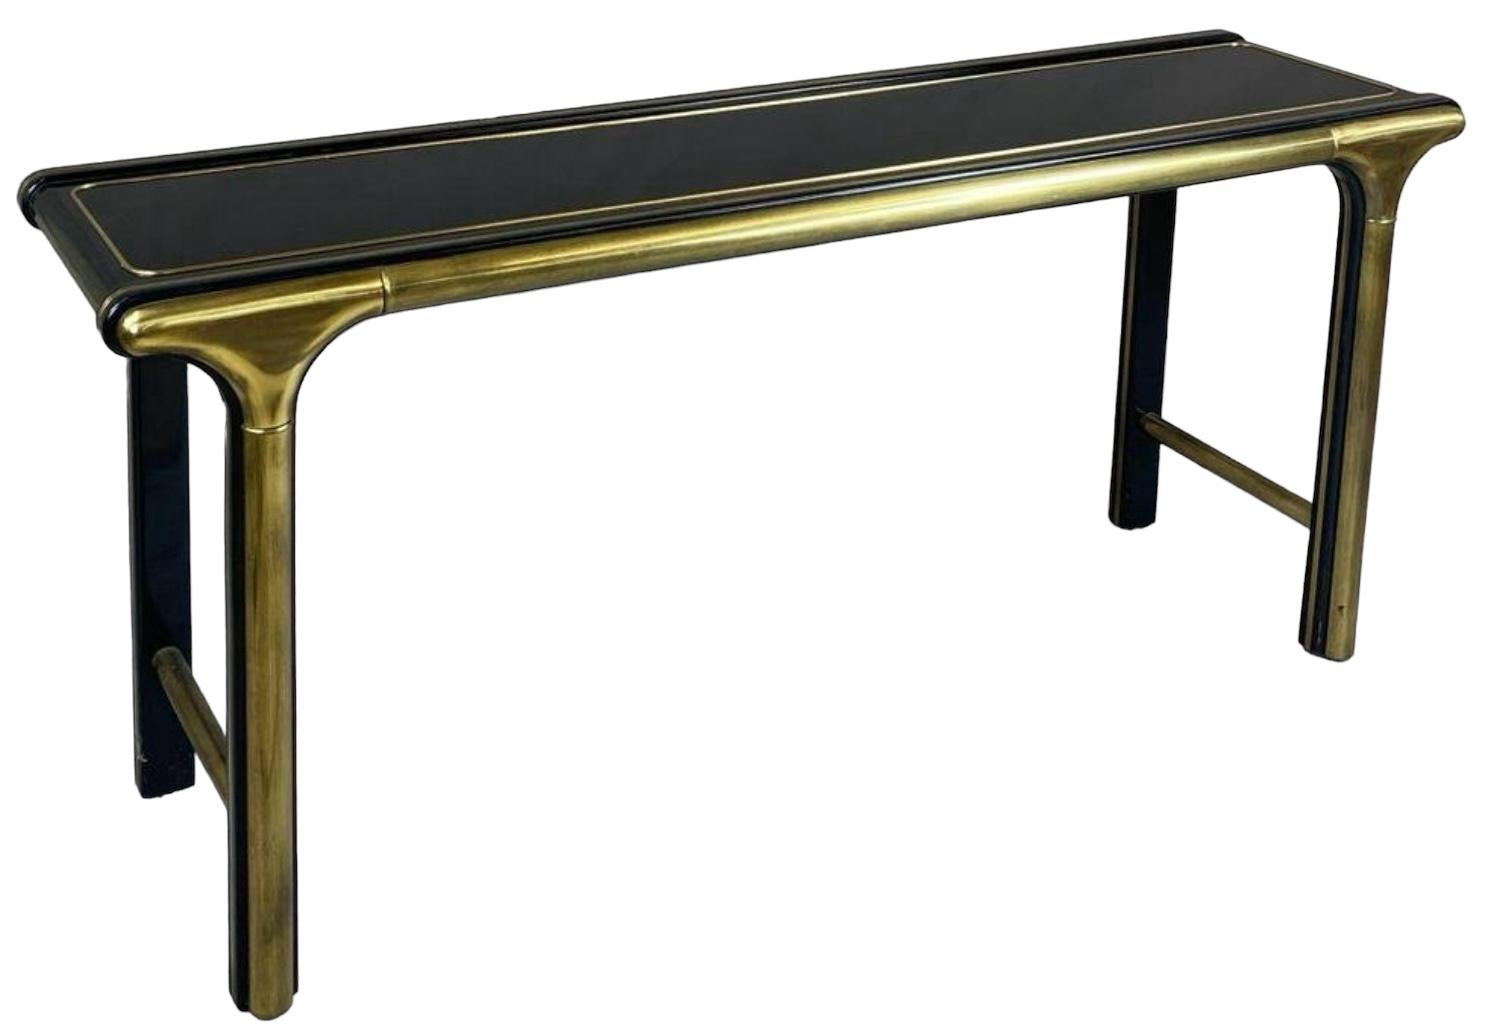 Modern Brass And Lacquer Console Table By William Doezema For Mastercraft For Sale 1